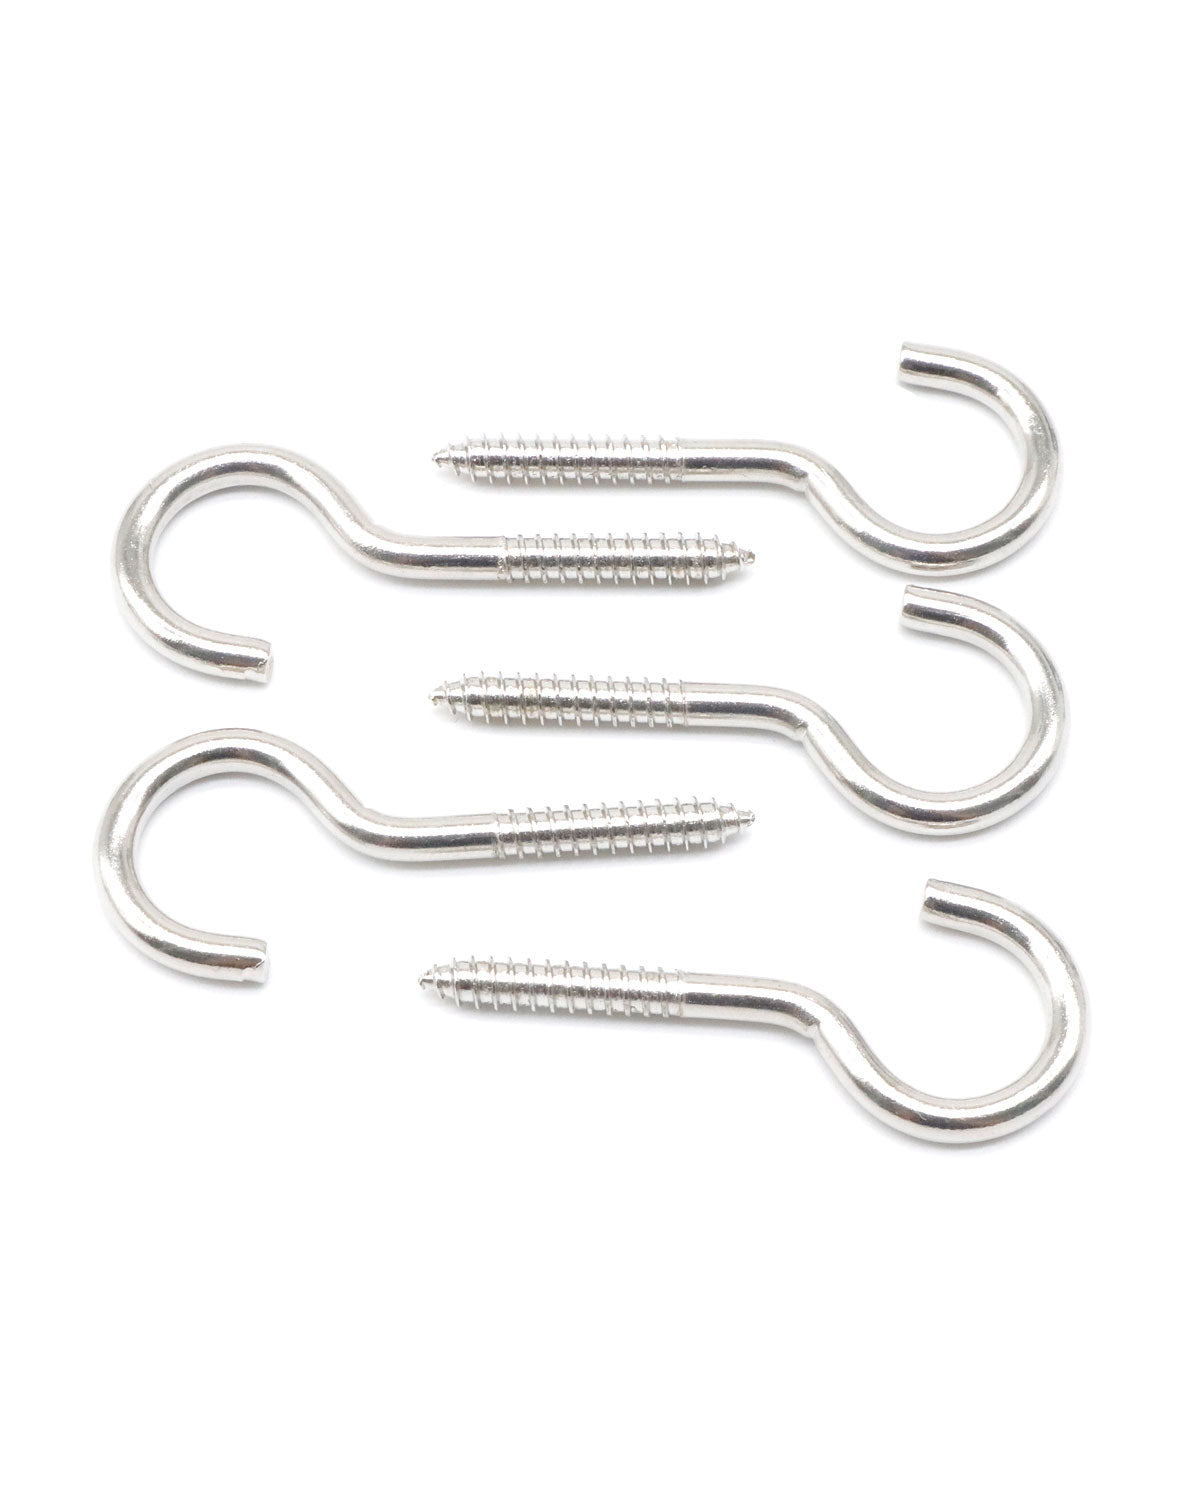  5 Pcs 2-3/4 Inch Eye Hooks Screw In Heavy Duty, Stainless  Steel 304#11 Eye Bolts Screw, Anti-Rust Self Tapping Eye Lag Screws Eyelet  Screw For Wood, Securing Cables WiresBy